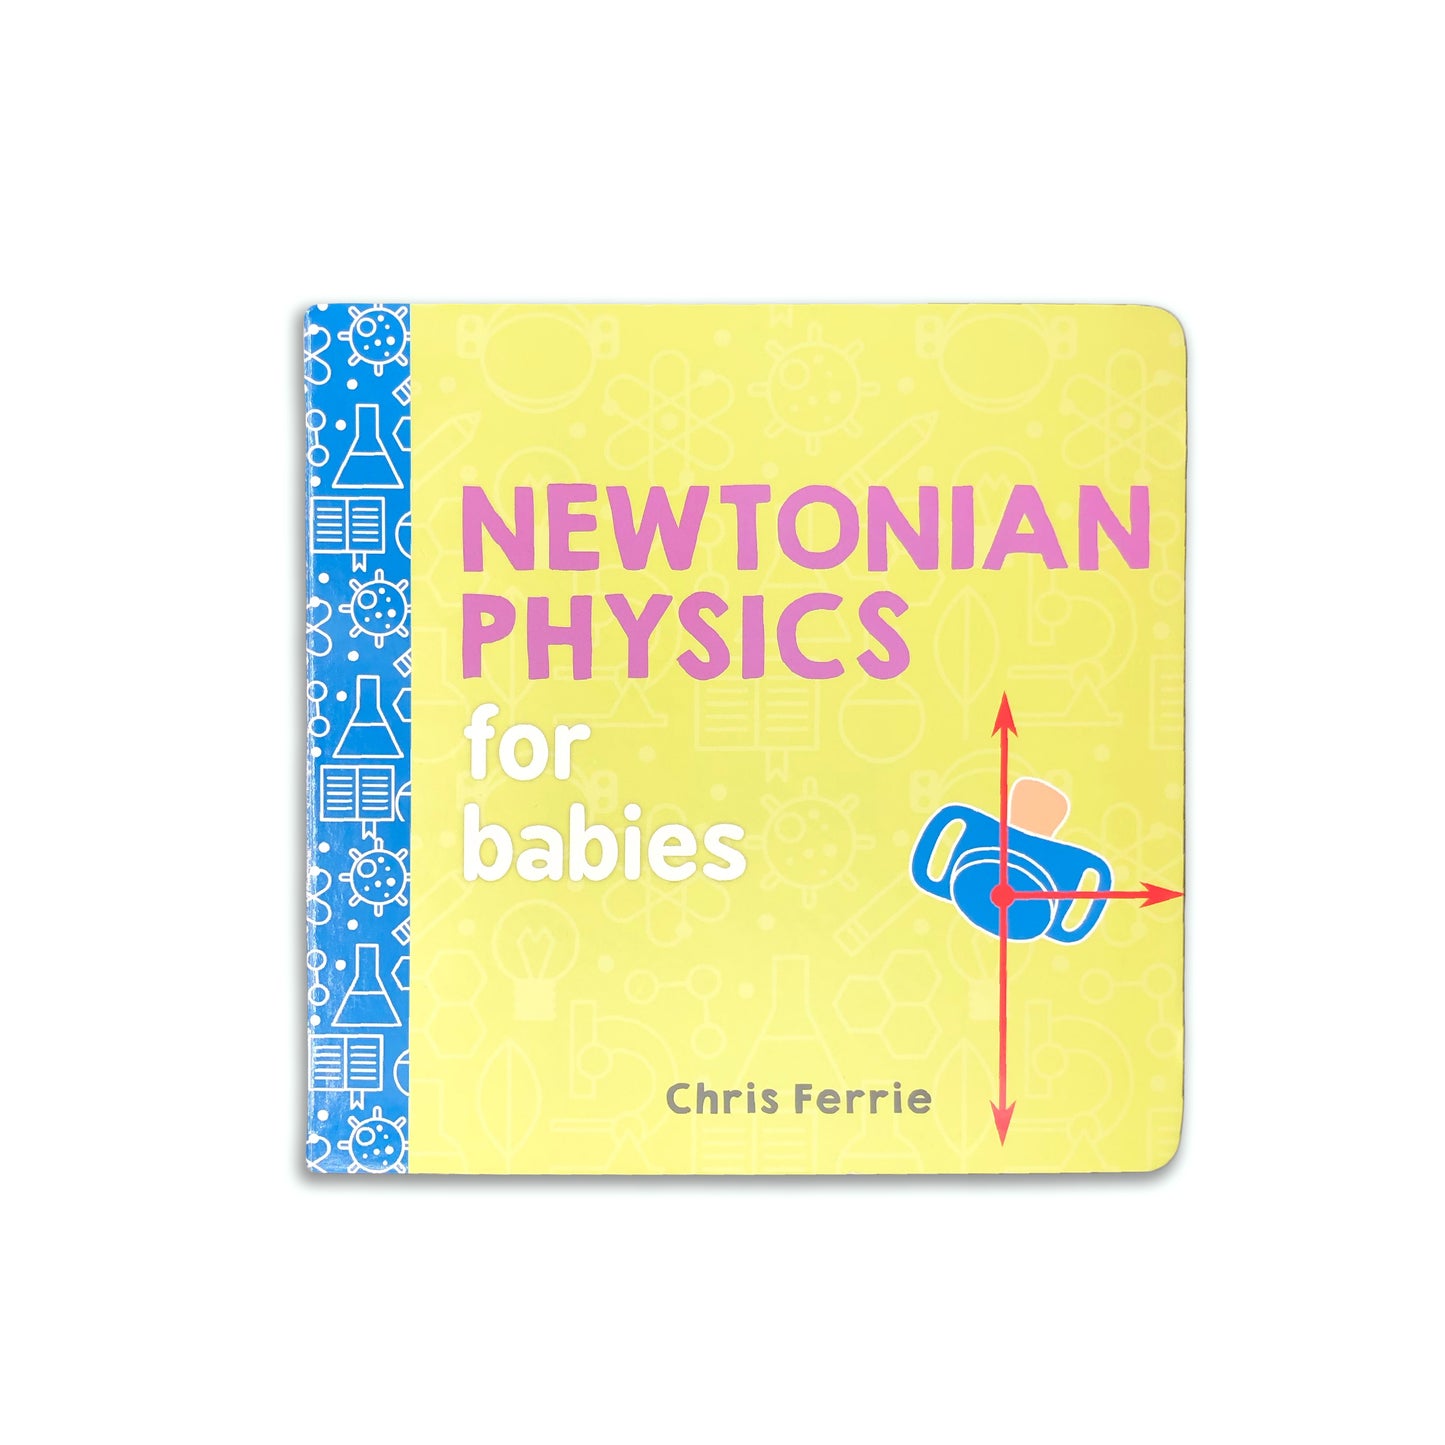 Newtonian Physics for Babies - Chris Ferrie (board book)